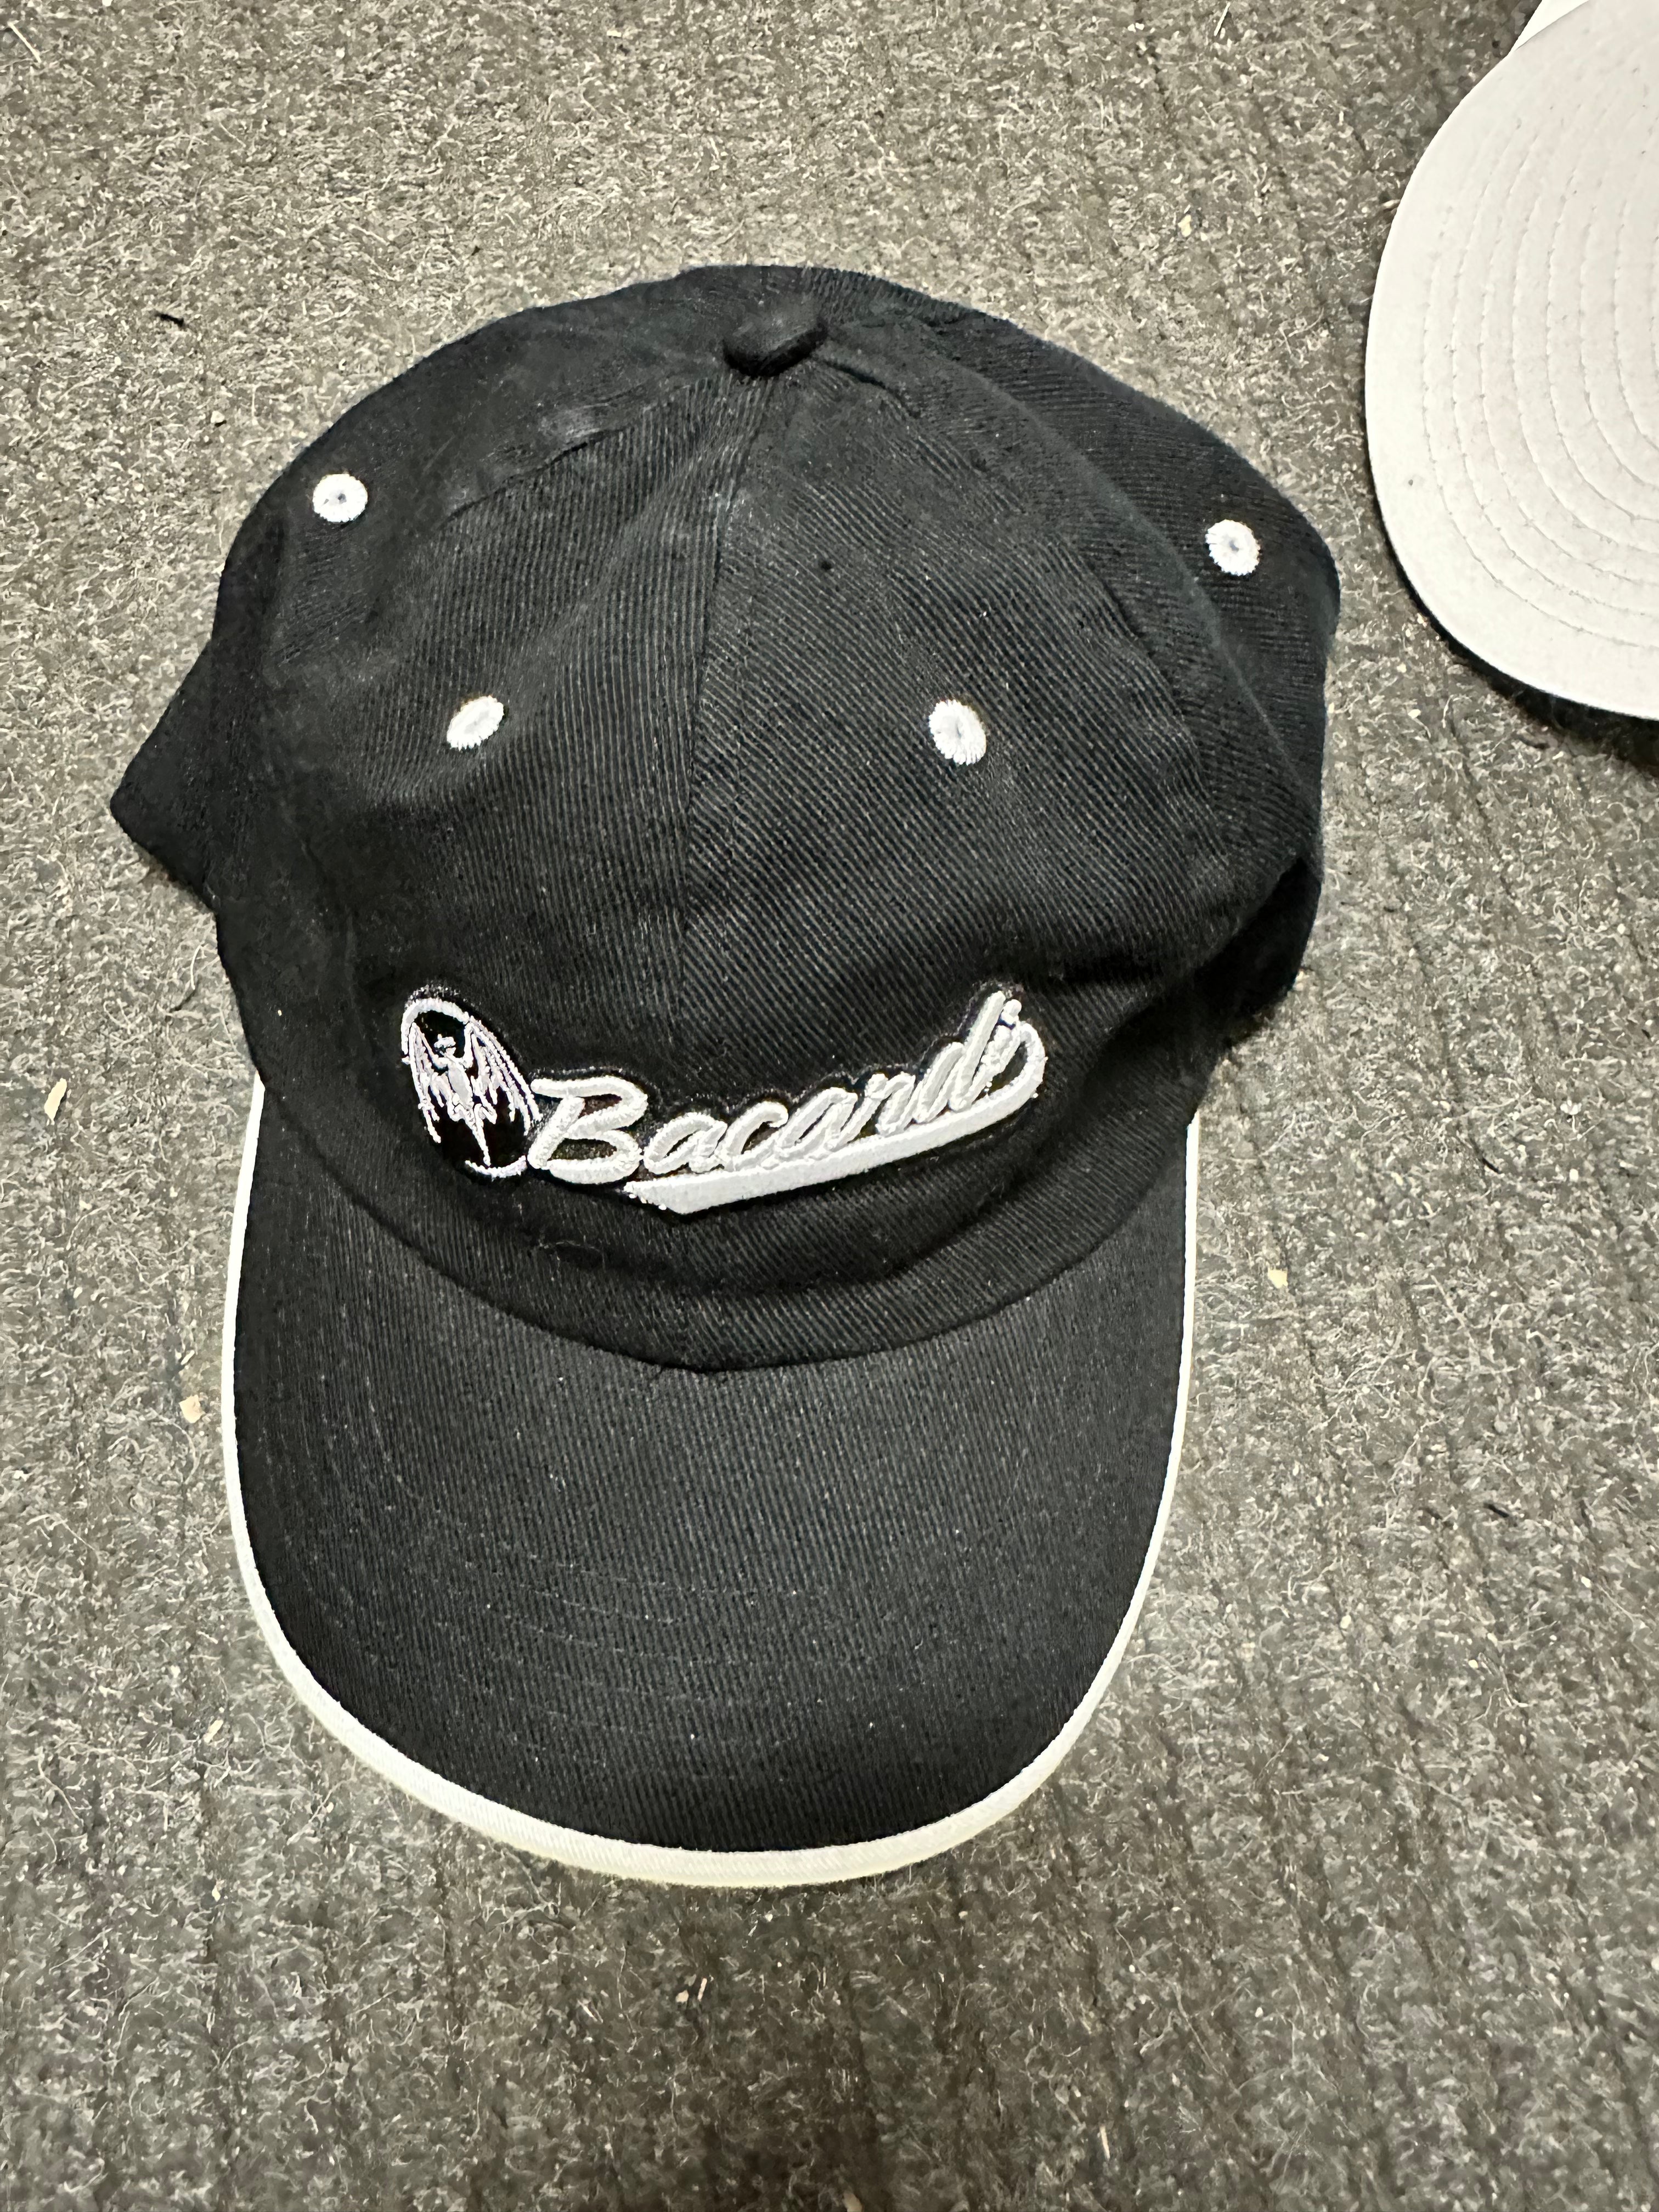 Bacardi Rum unique limited issued event hat